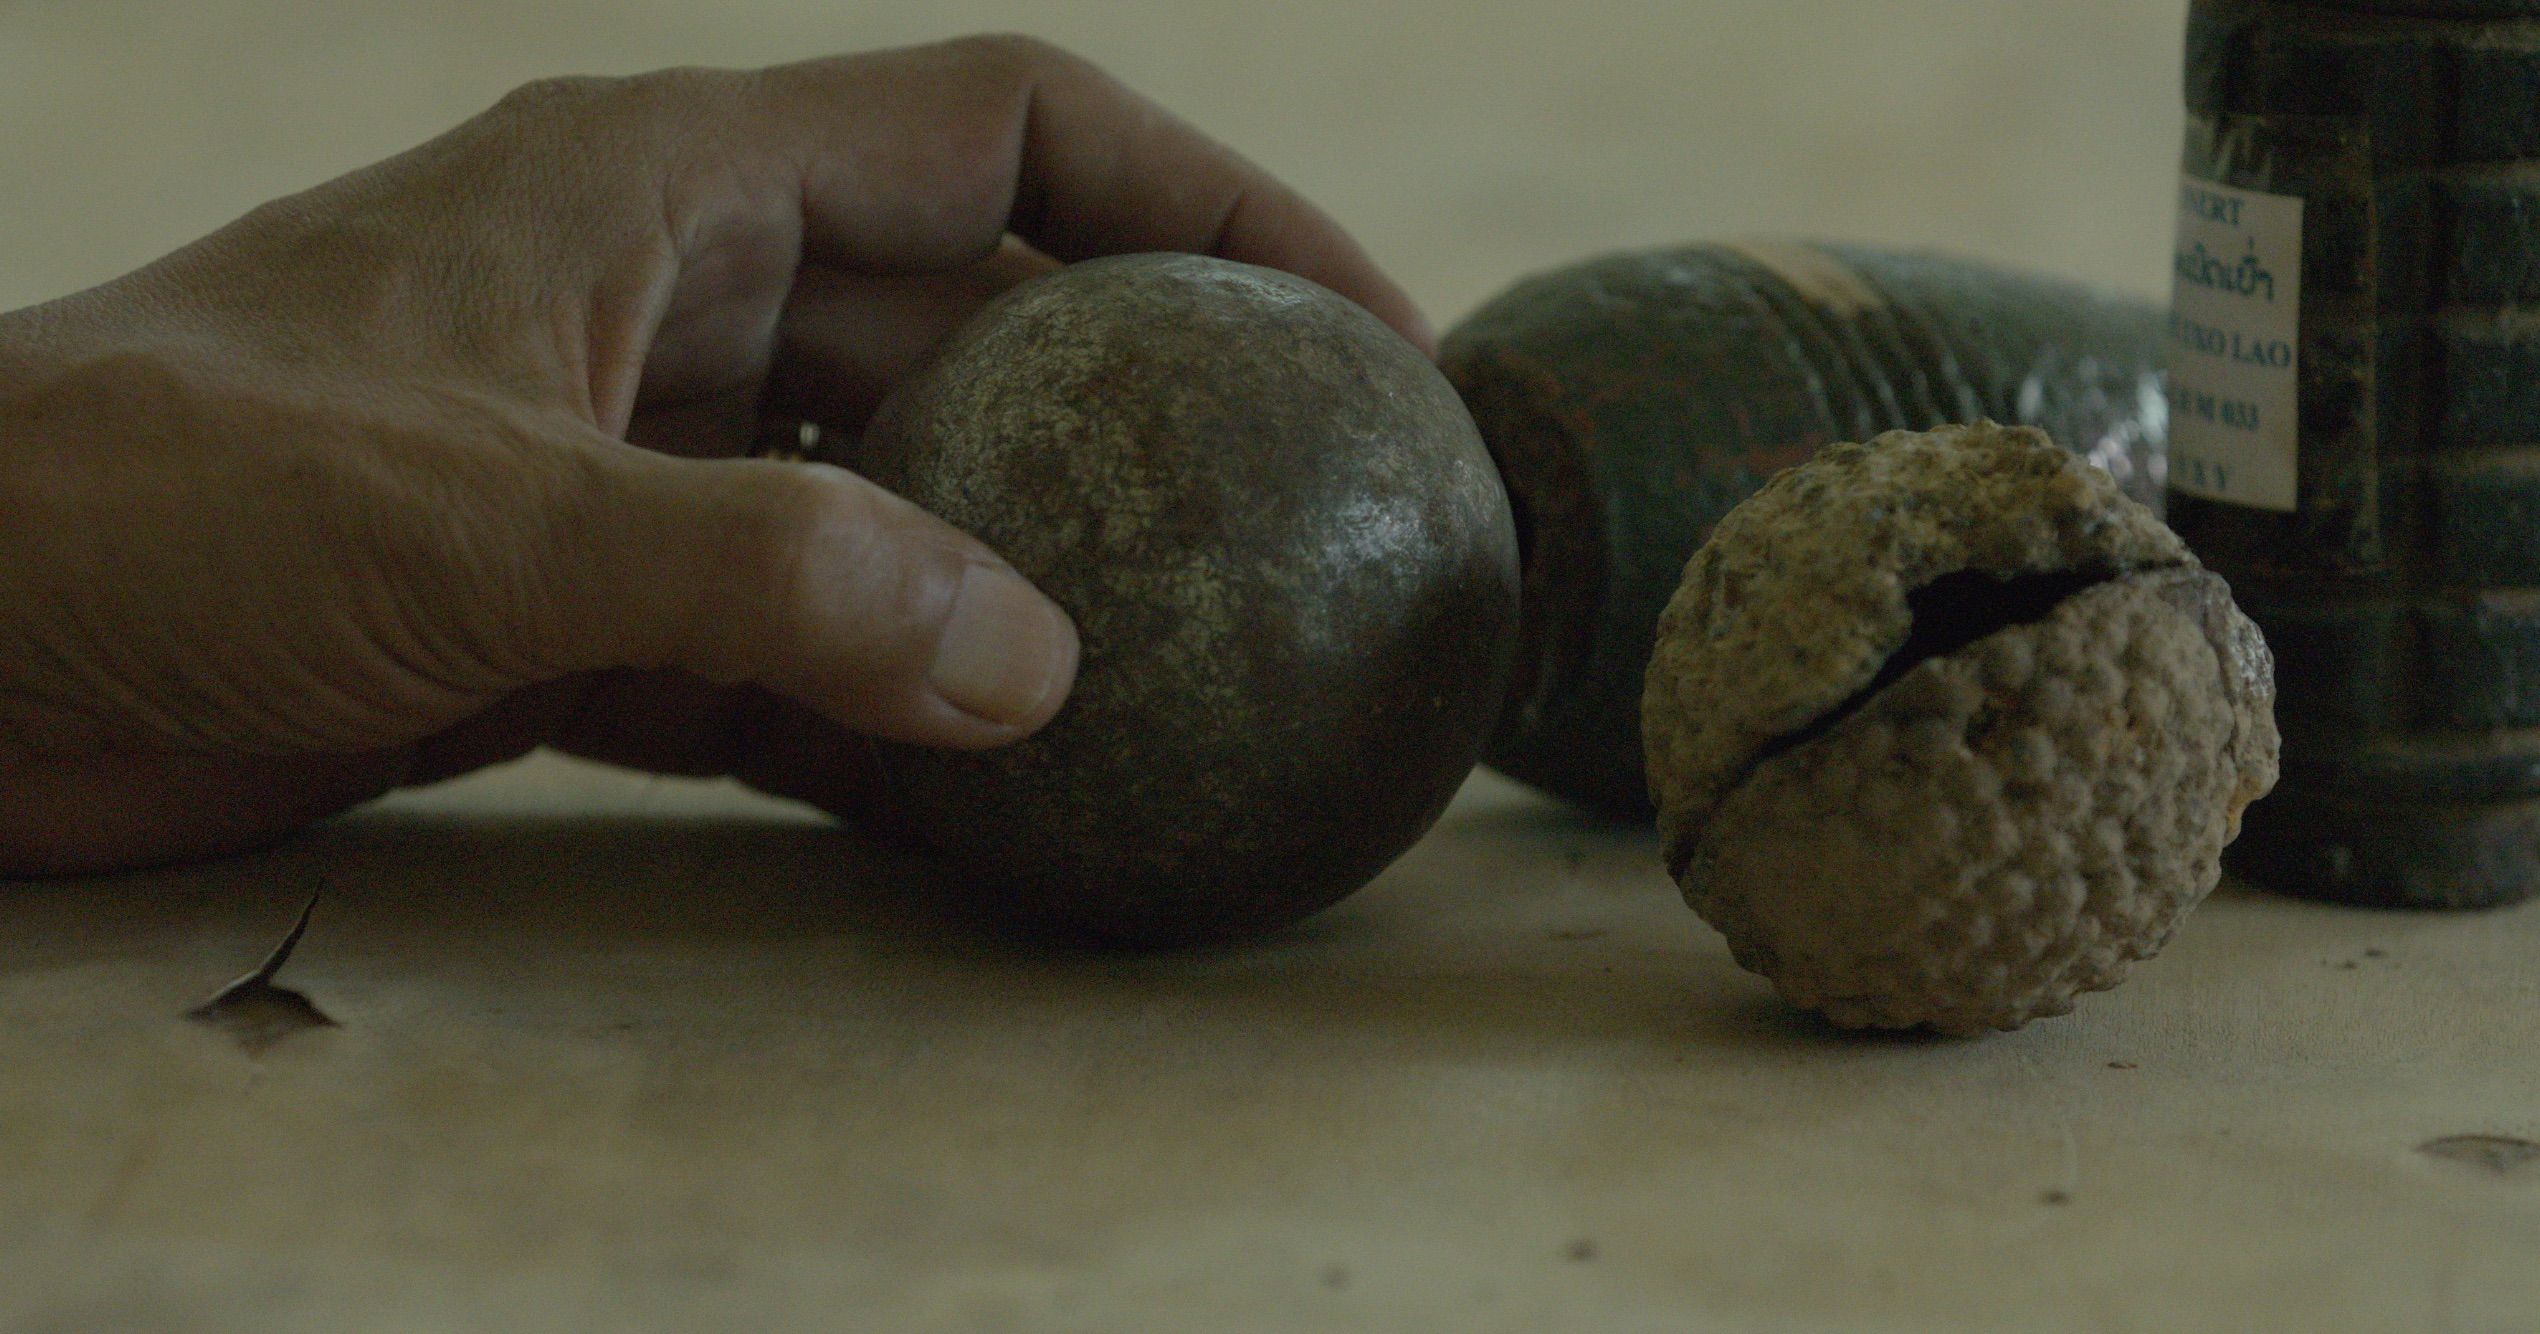 The UXO Lao Province coordinator explains how similar petanque balls and cluster bombs are. Image by Erin McGoff. Laos, 2017.